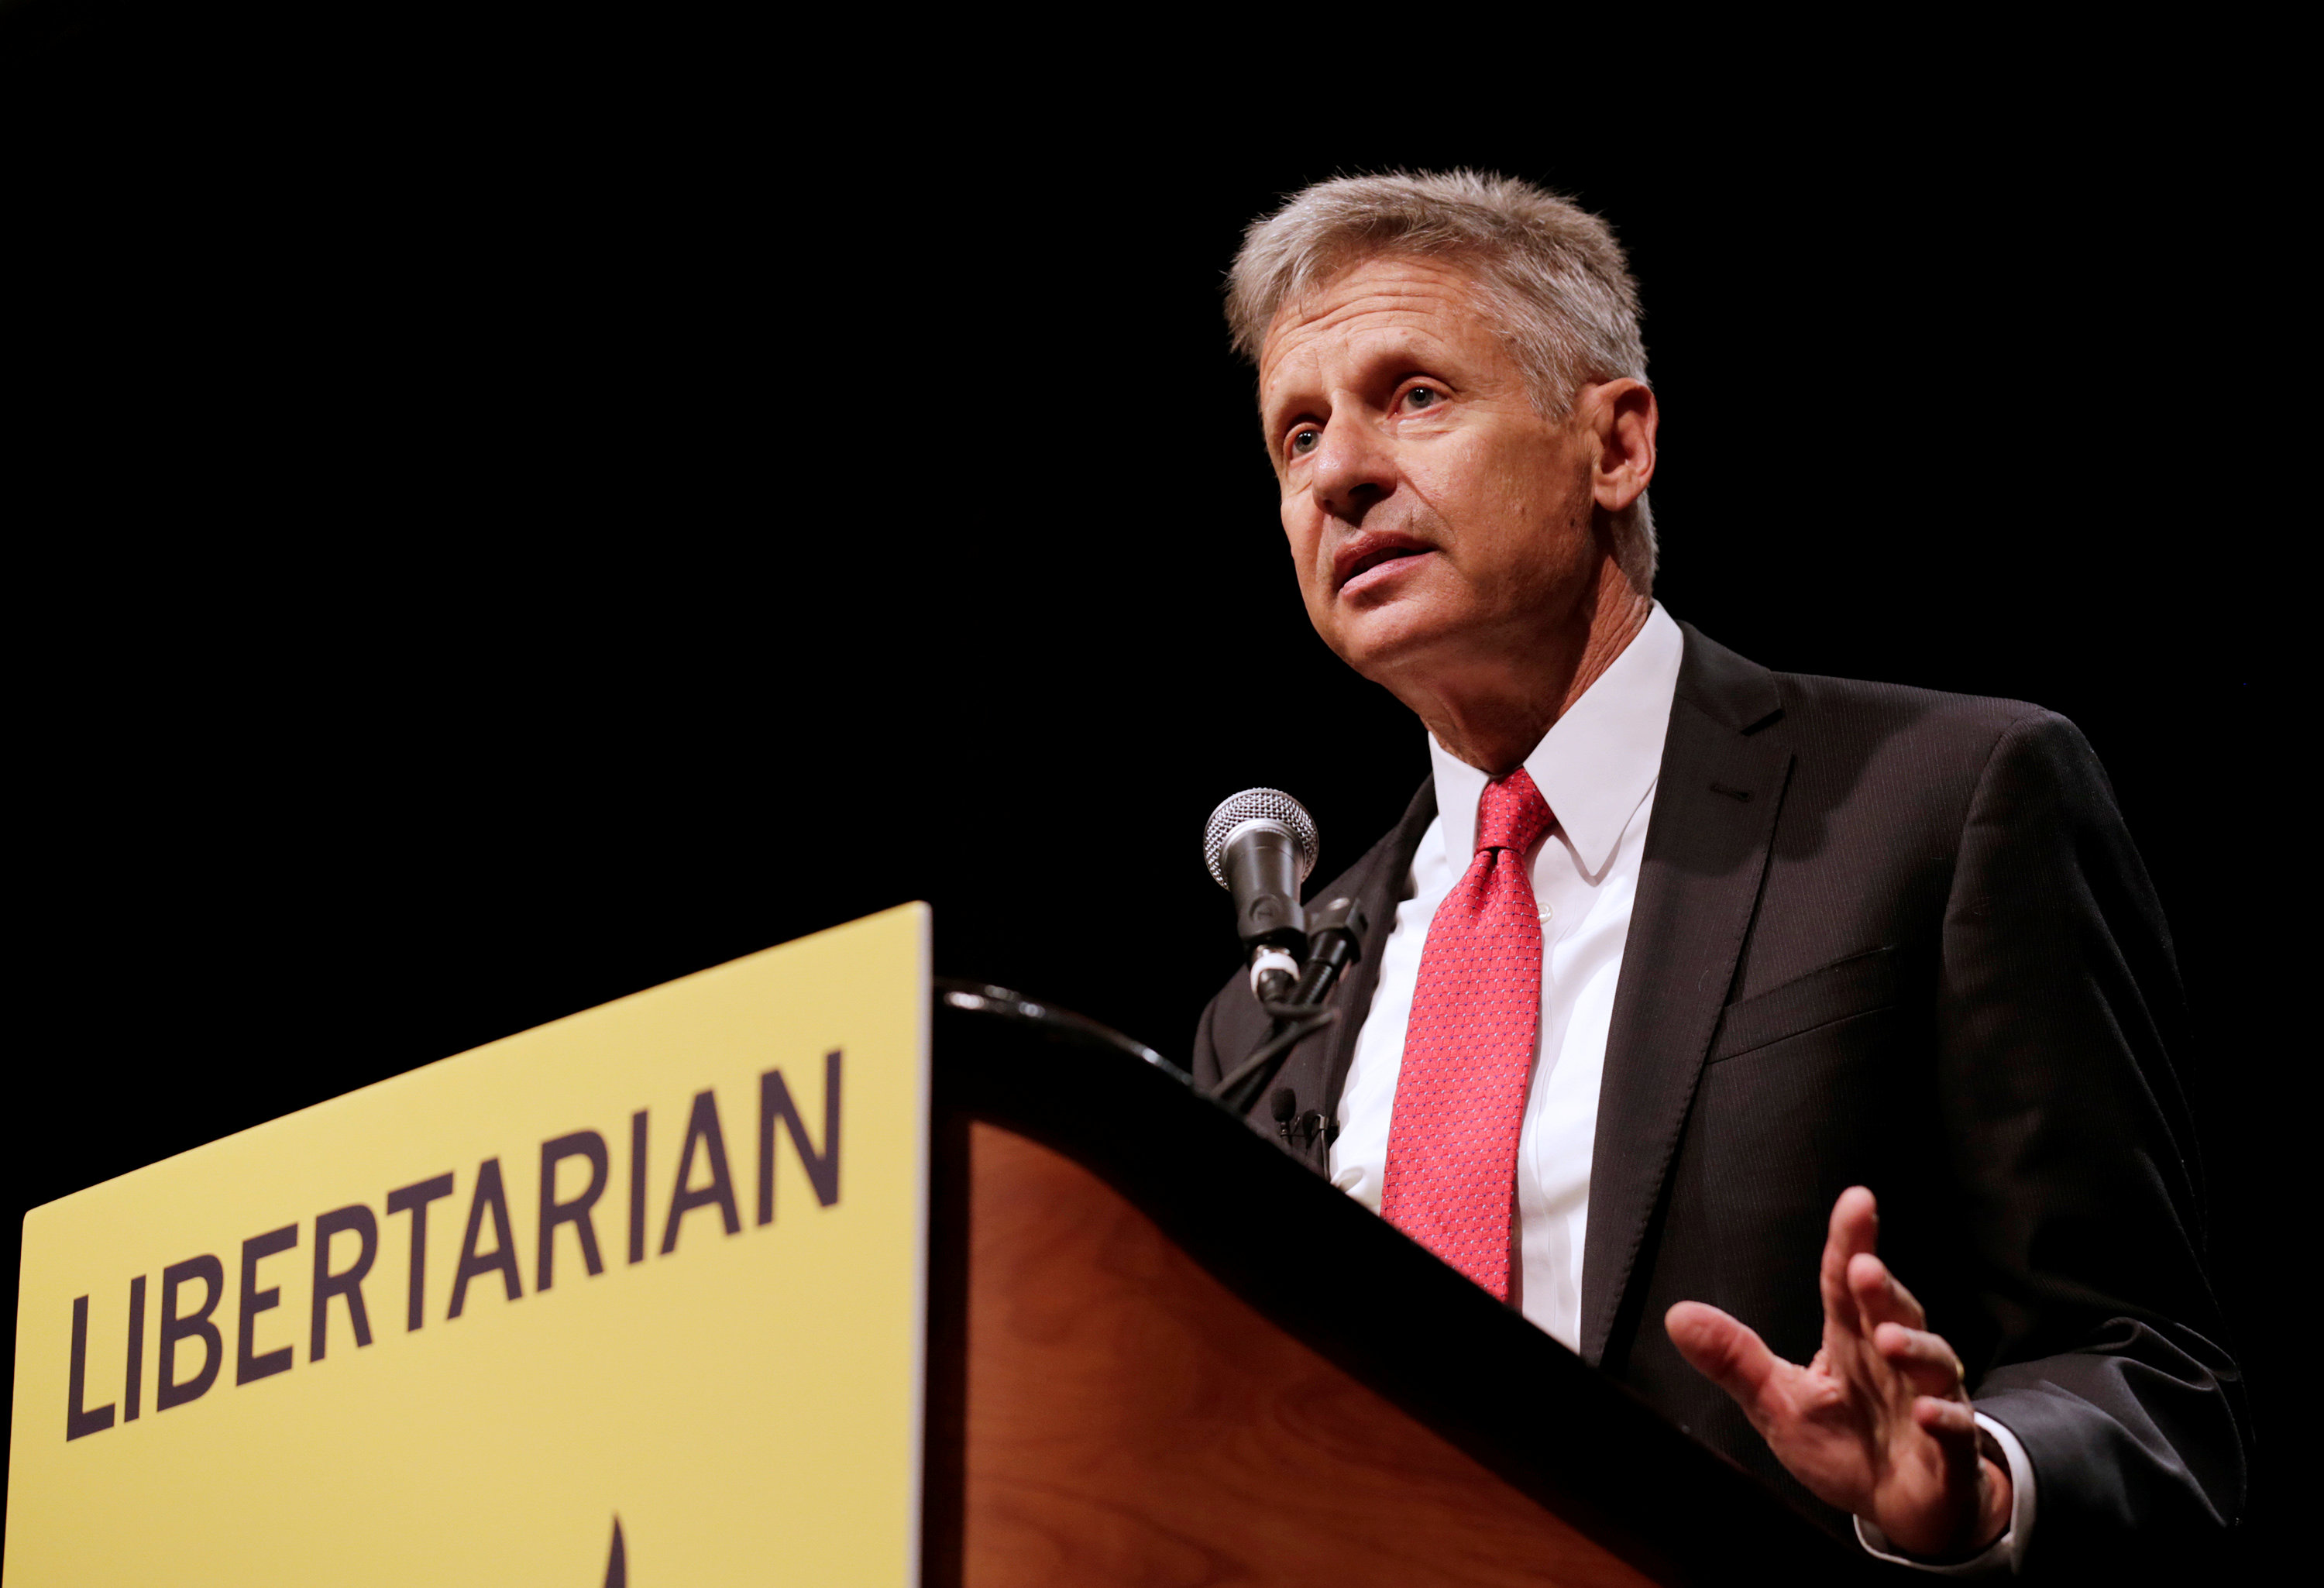 Libertarian nominee pushes for "major party status" CBS News